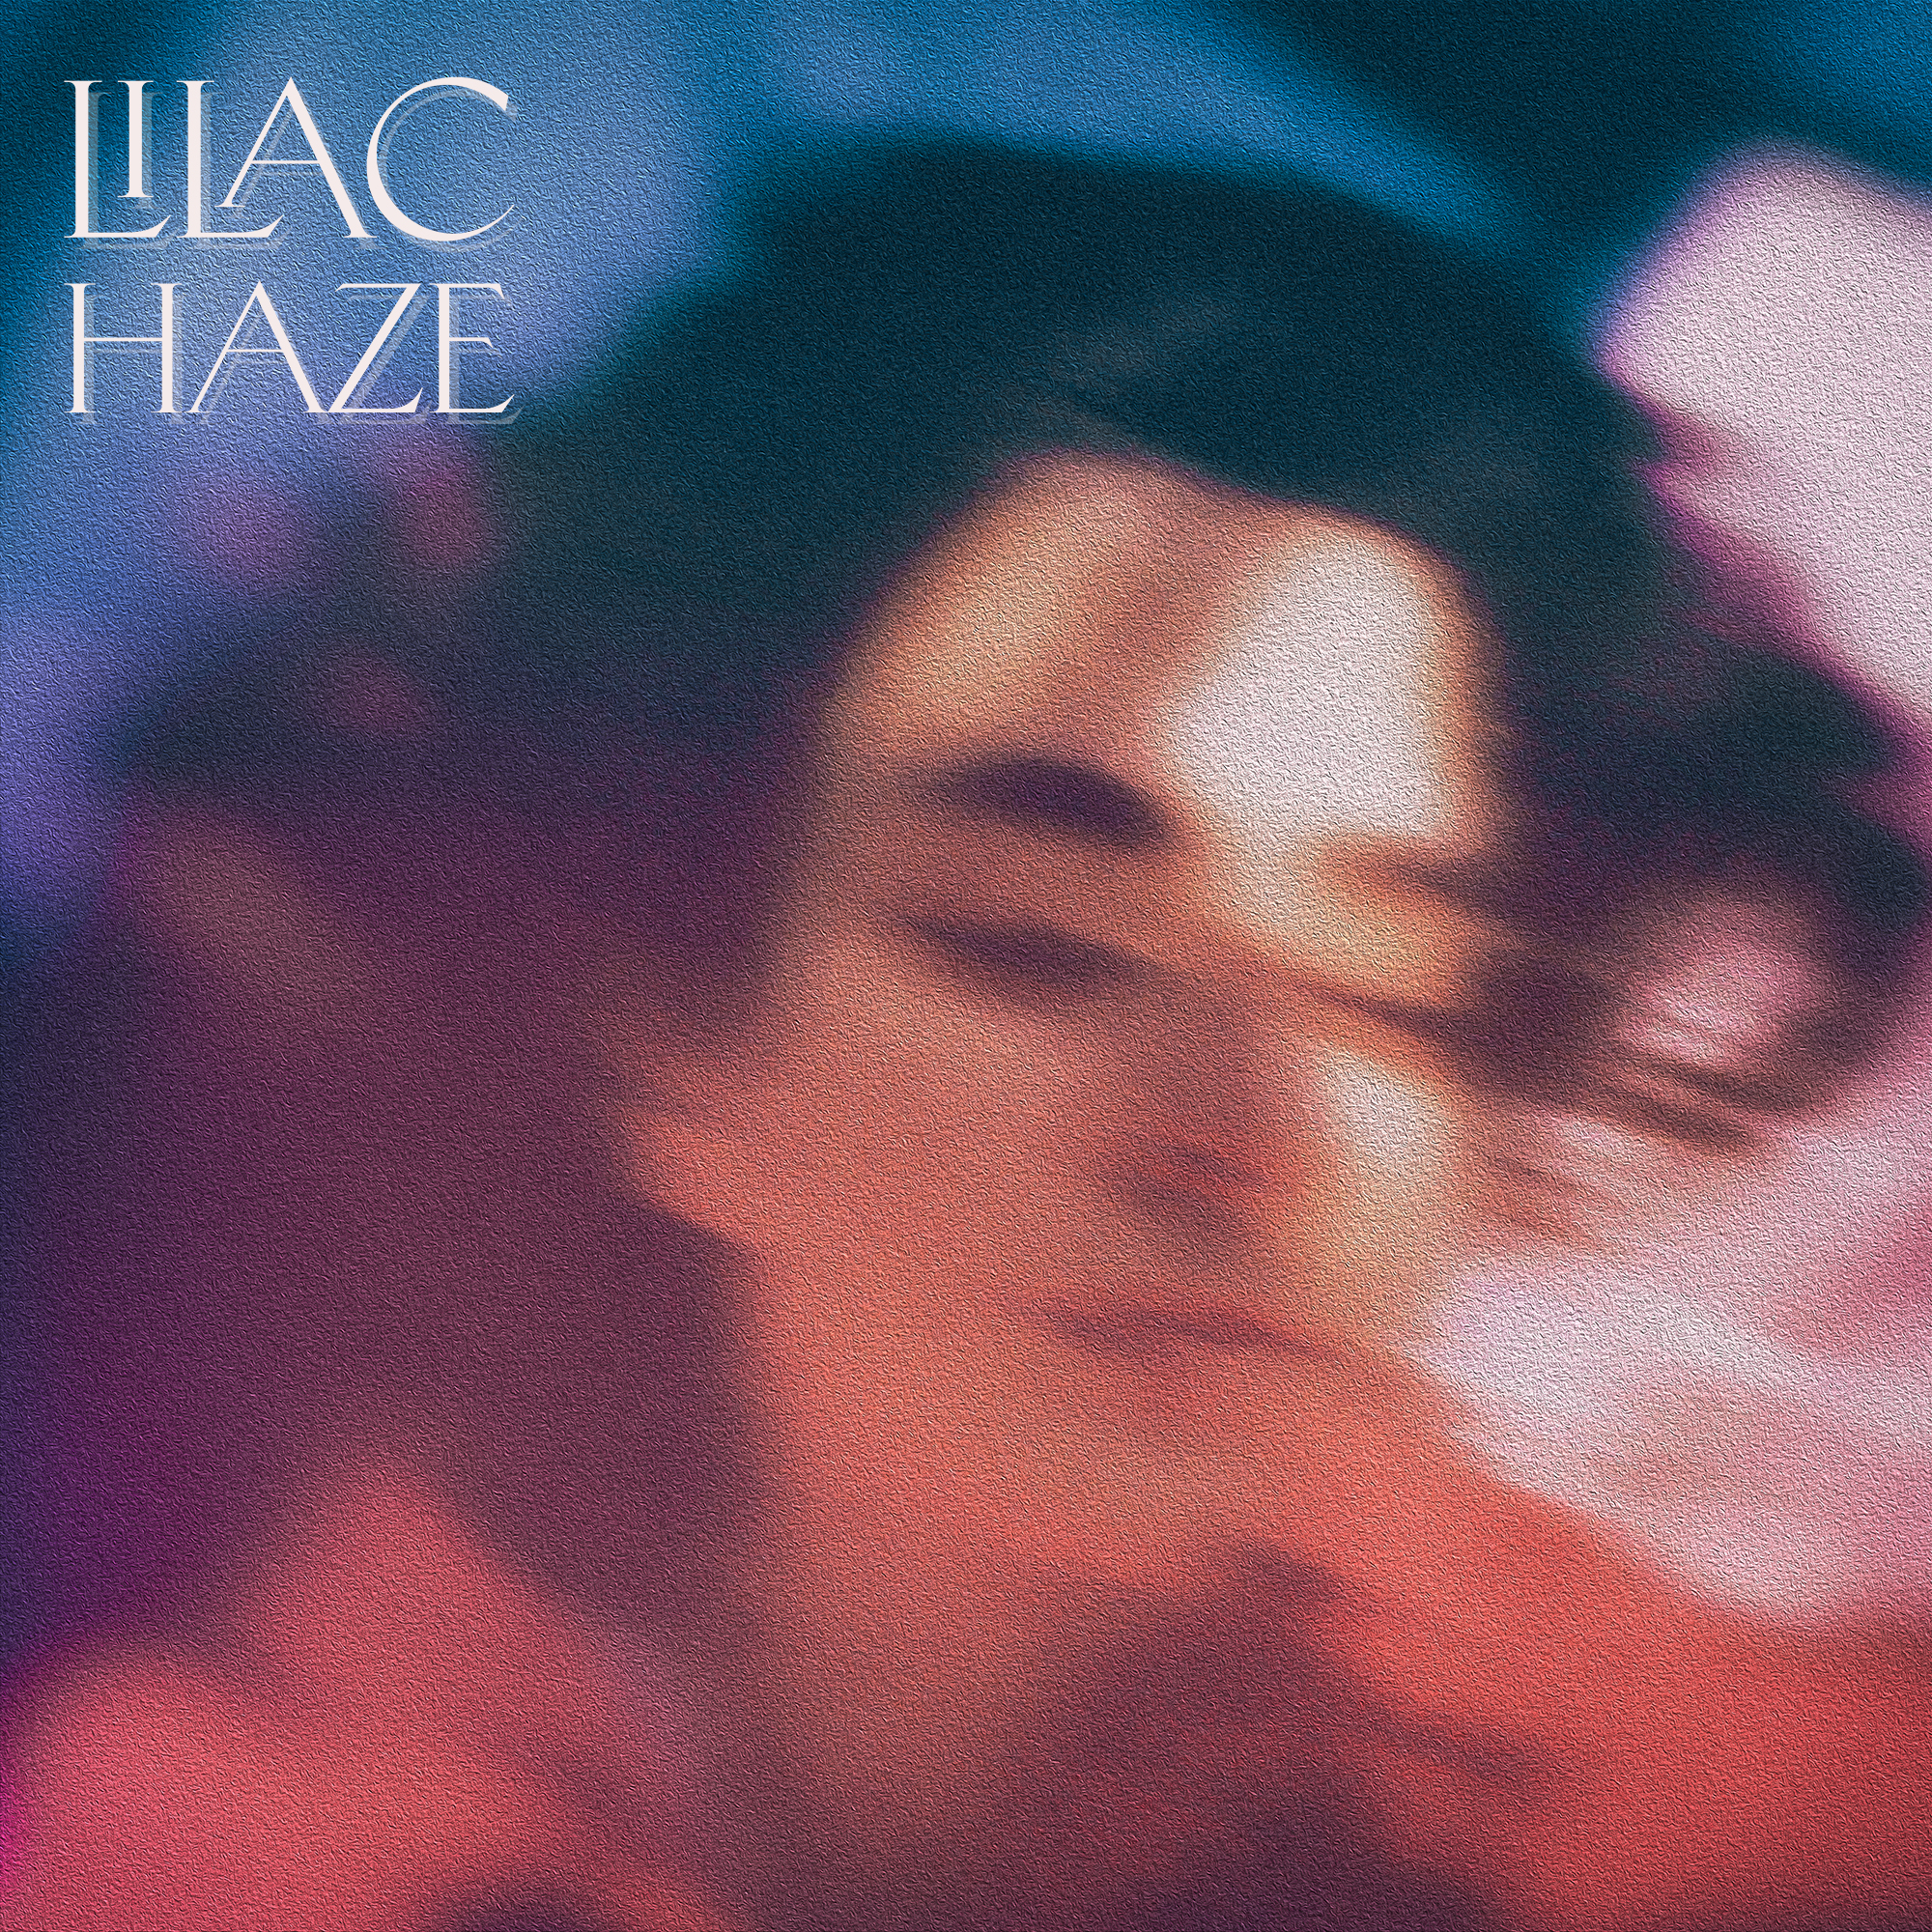 DEBUT DOUBLE SINGLE: “The Ghost That I Once Knew” and “Lilac Haze” by Lilac Haze